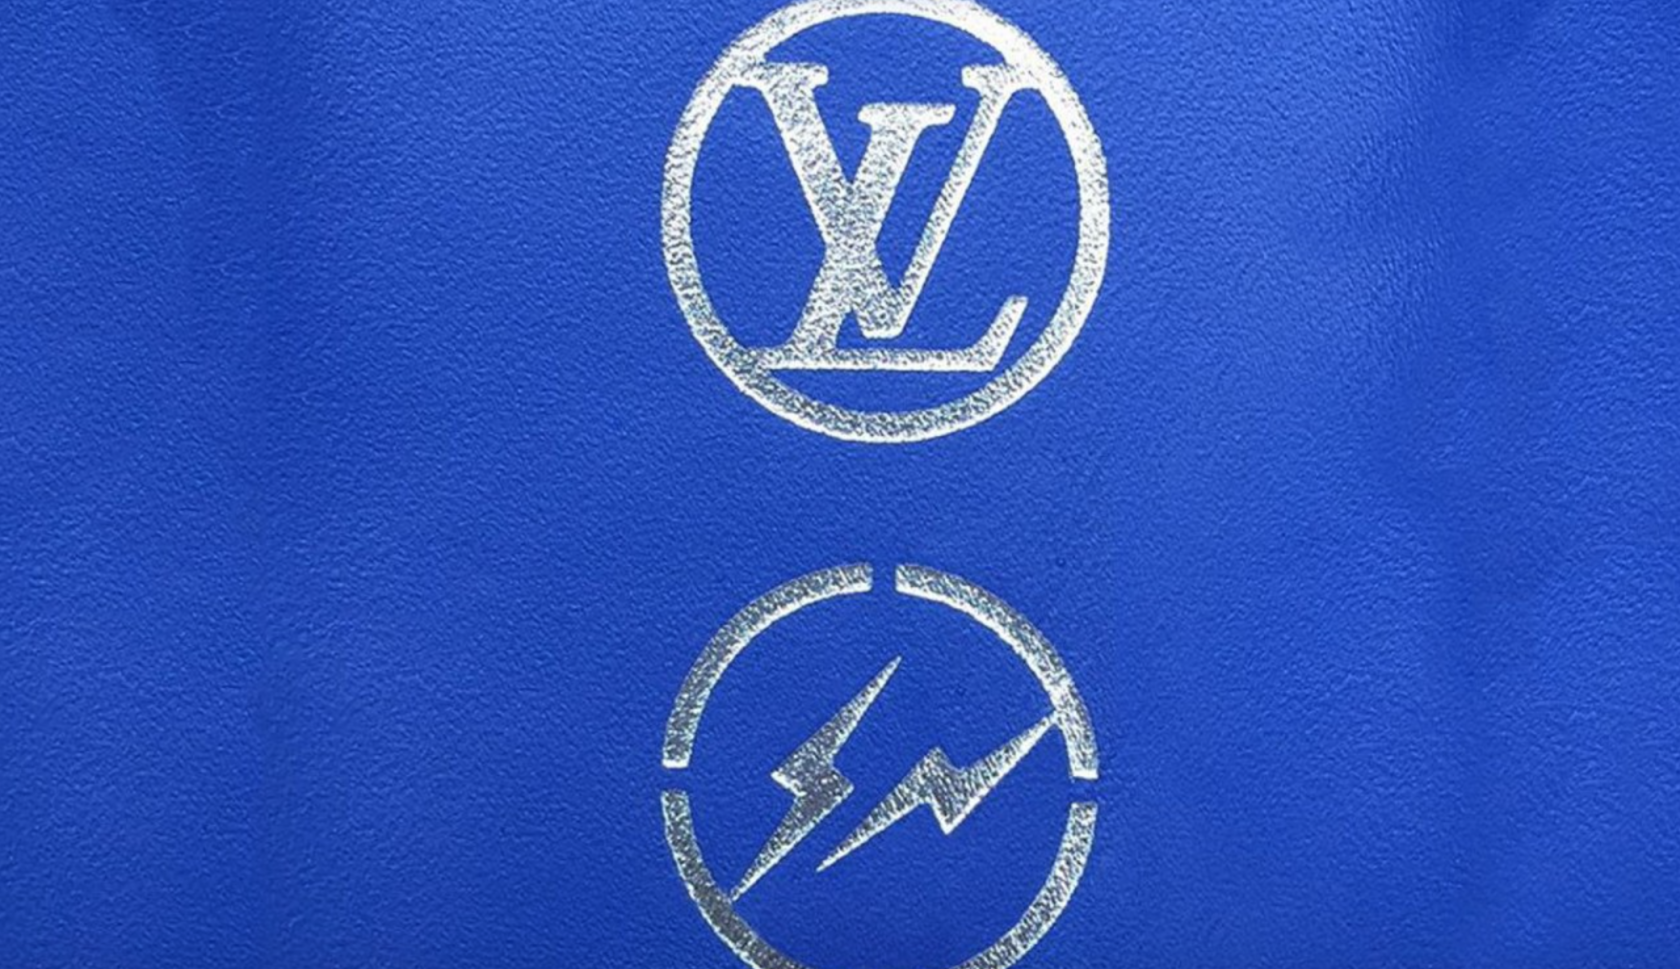 First Look At The Upcoming Louis Vuitton x fragment design